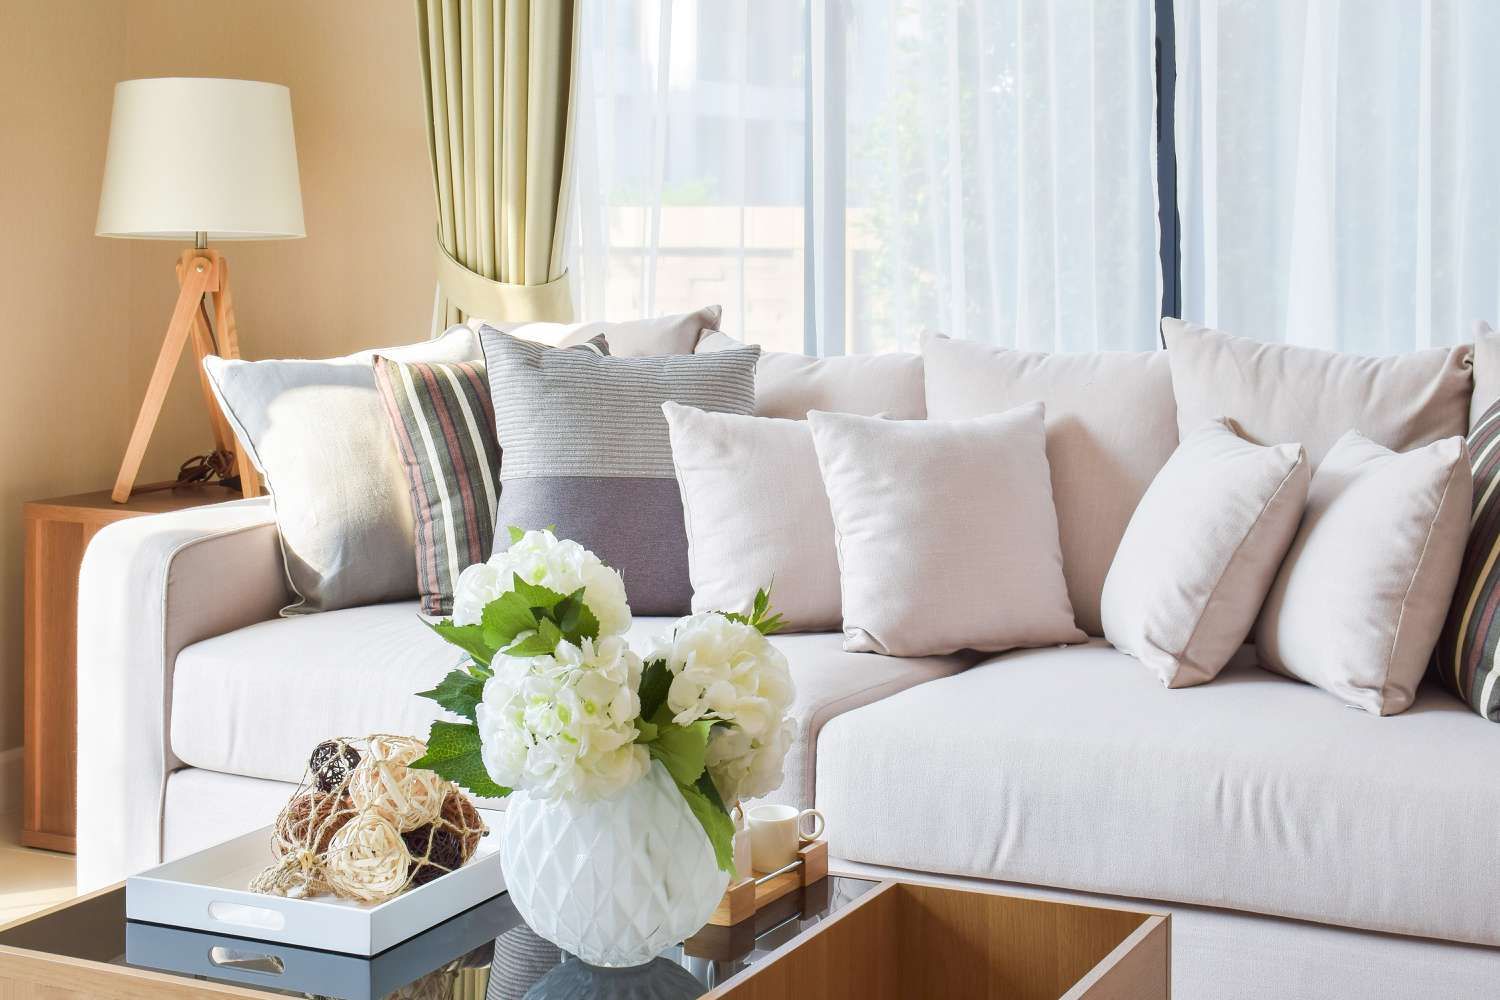 How To Store Pillows In Living Room